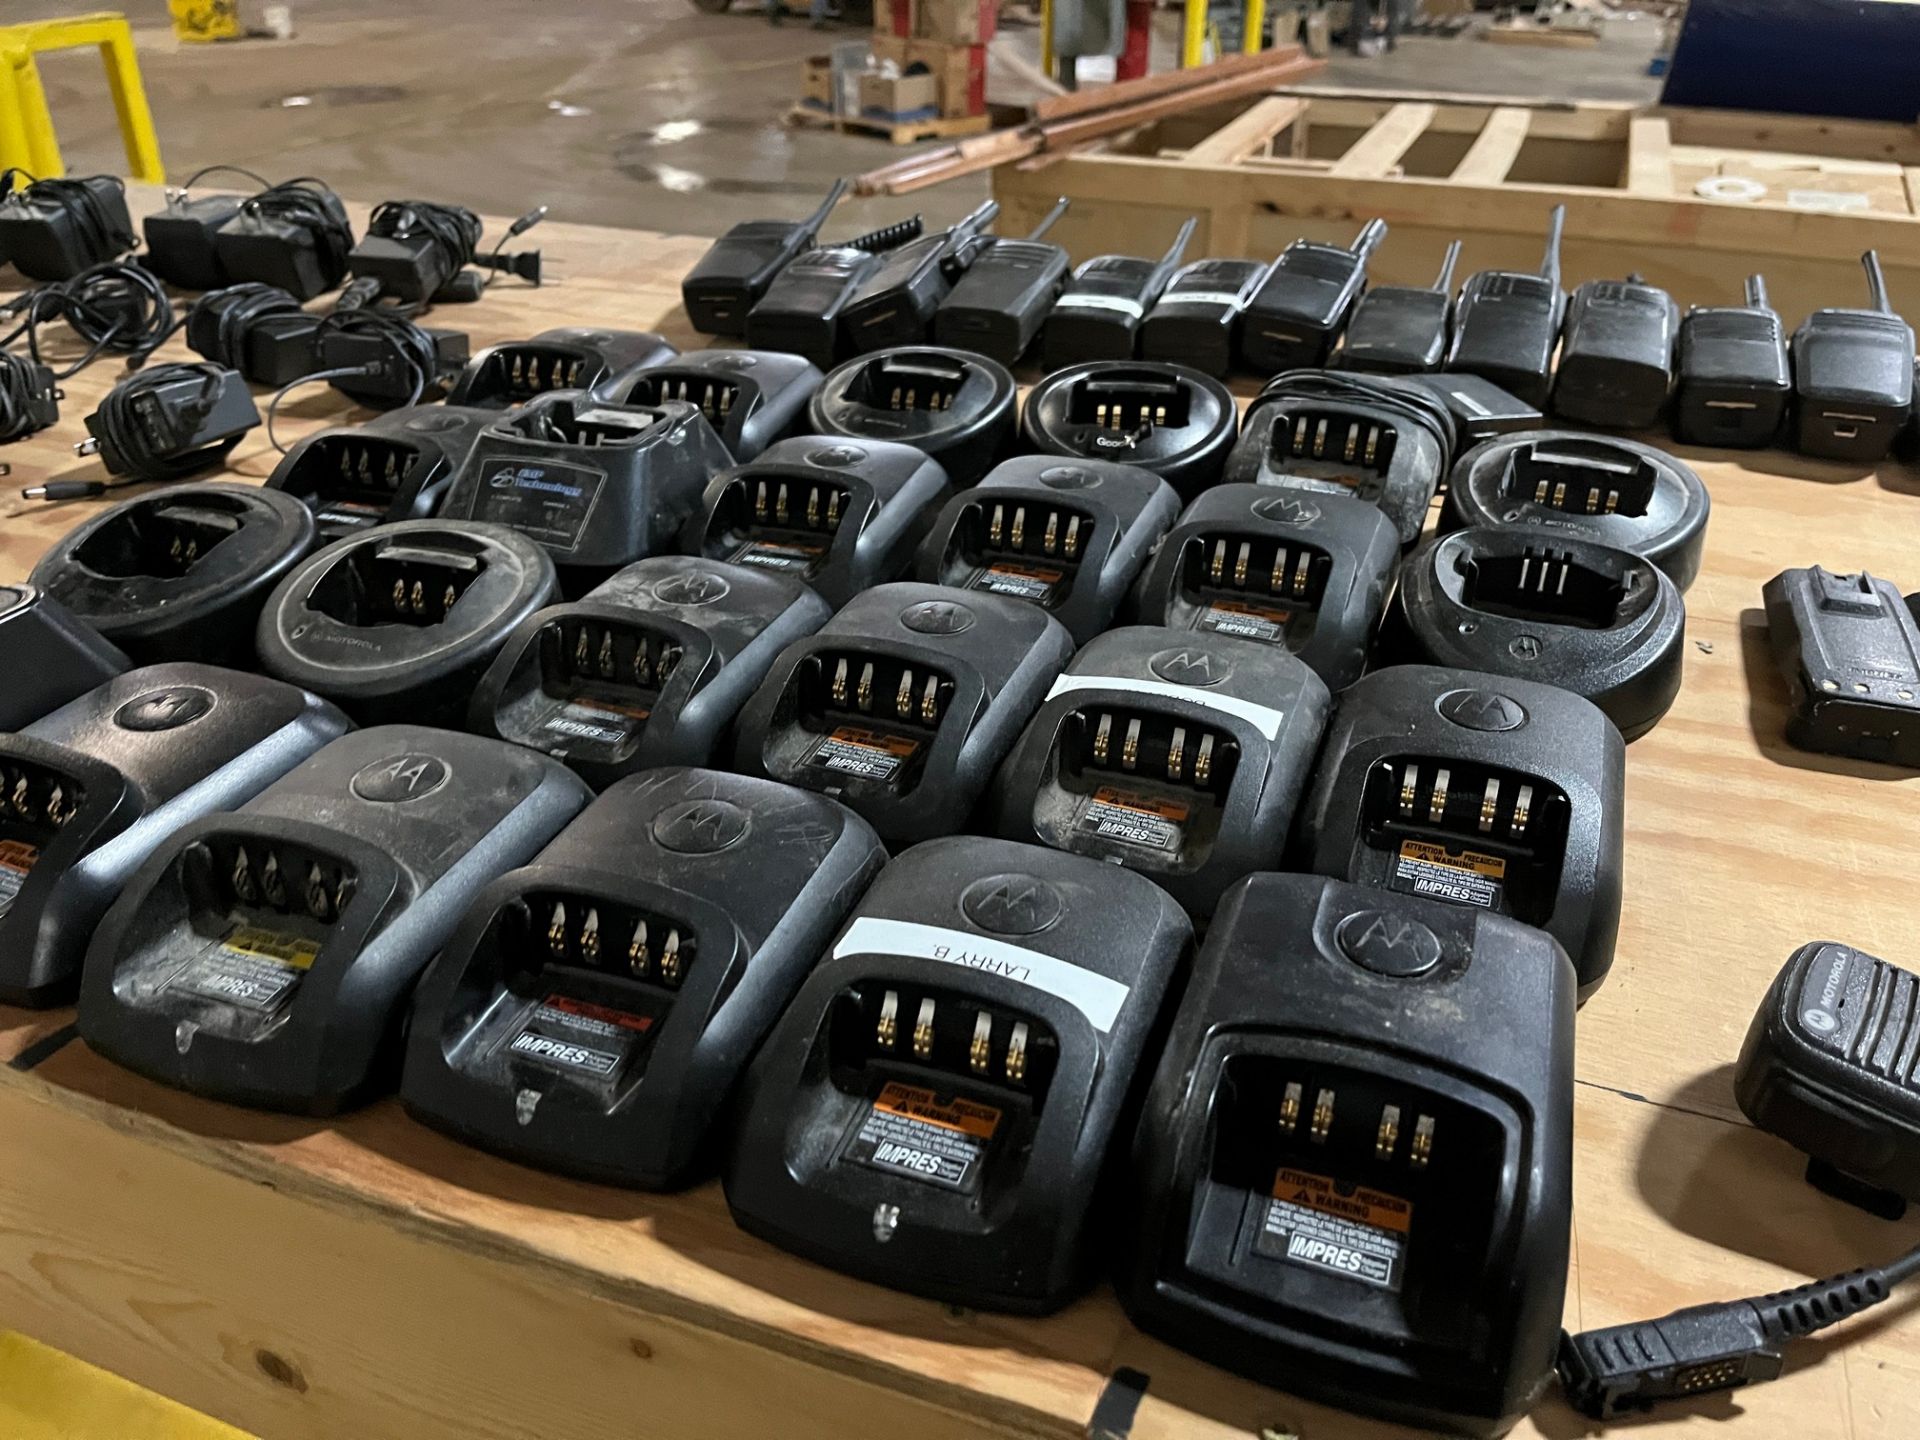 LOT OF MOTOROLA PLANT RADIOS W/ STATIONS, MICROPHONES, CHARGERS, BATTERIES, POWER SUPPLIES - Image 3 of 6